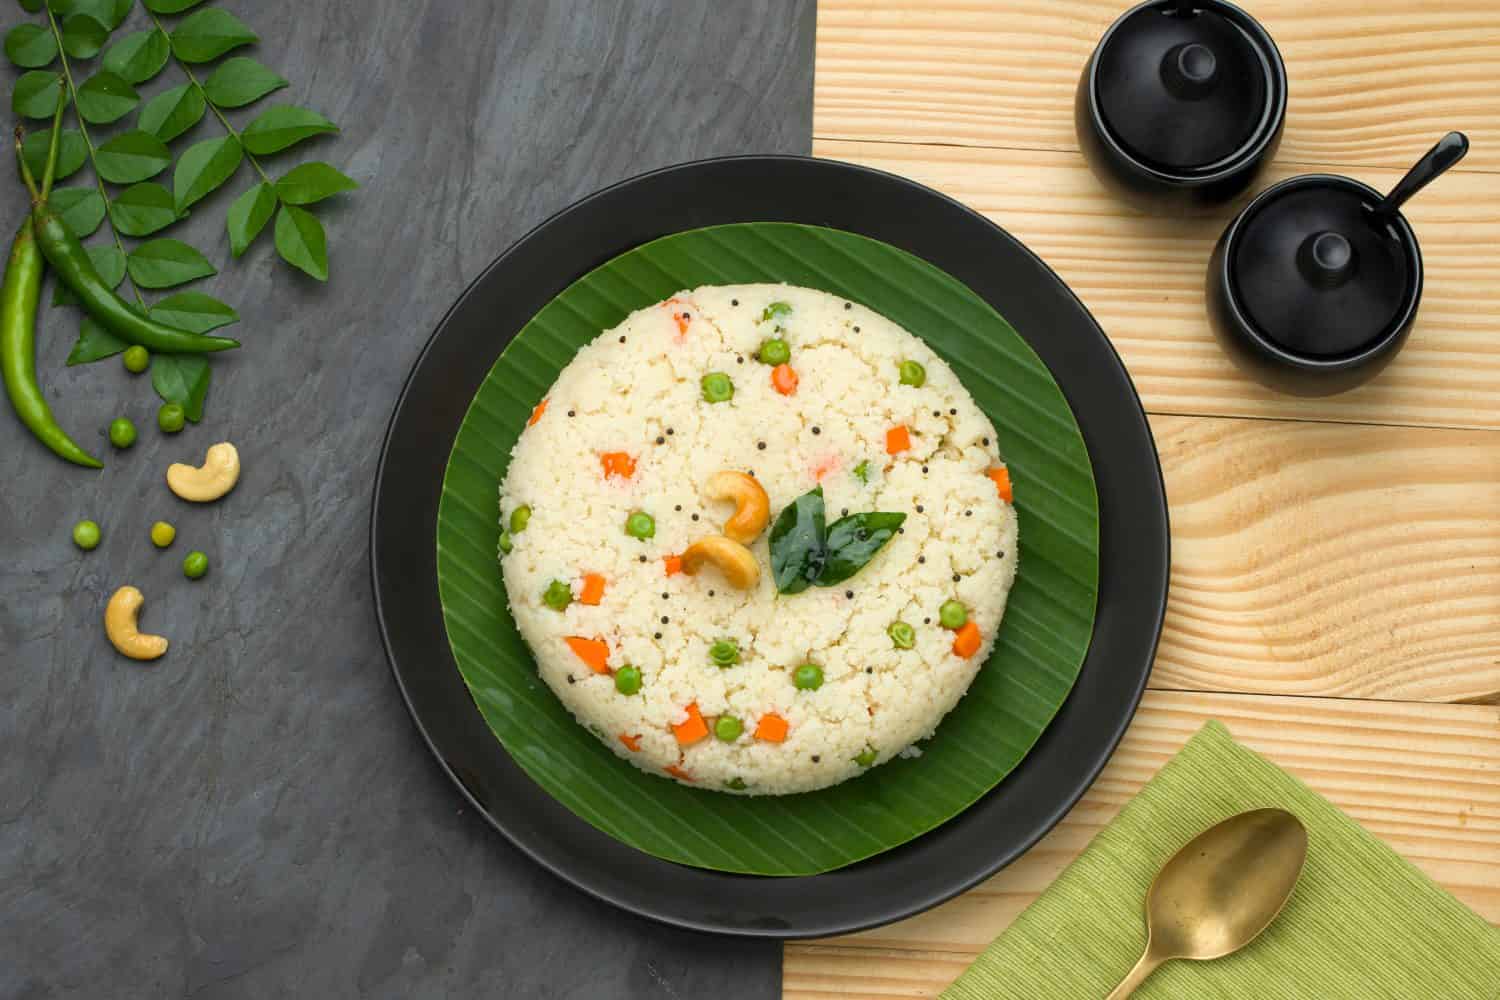 Upma made of samolina or rava upma, most famous south indian breakfast item which is arranged in a  black plate  and garnished with fried cashew nut and curry leaves with grey colour background.